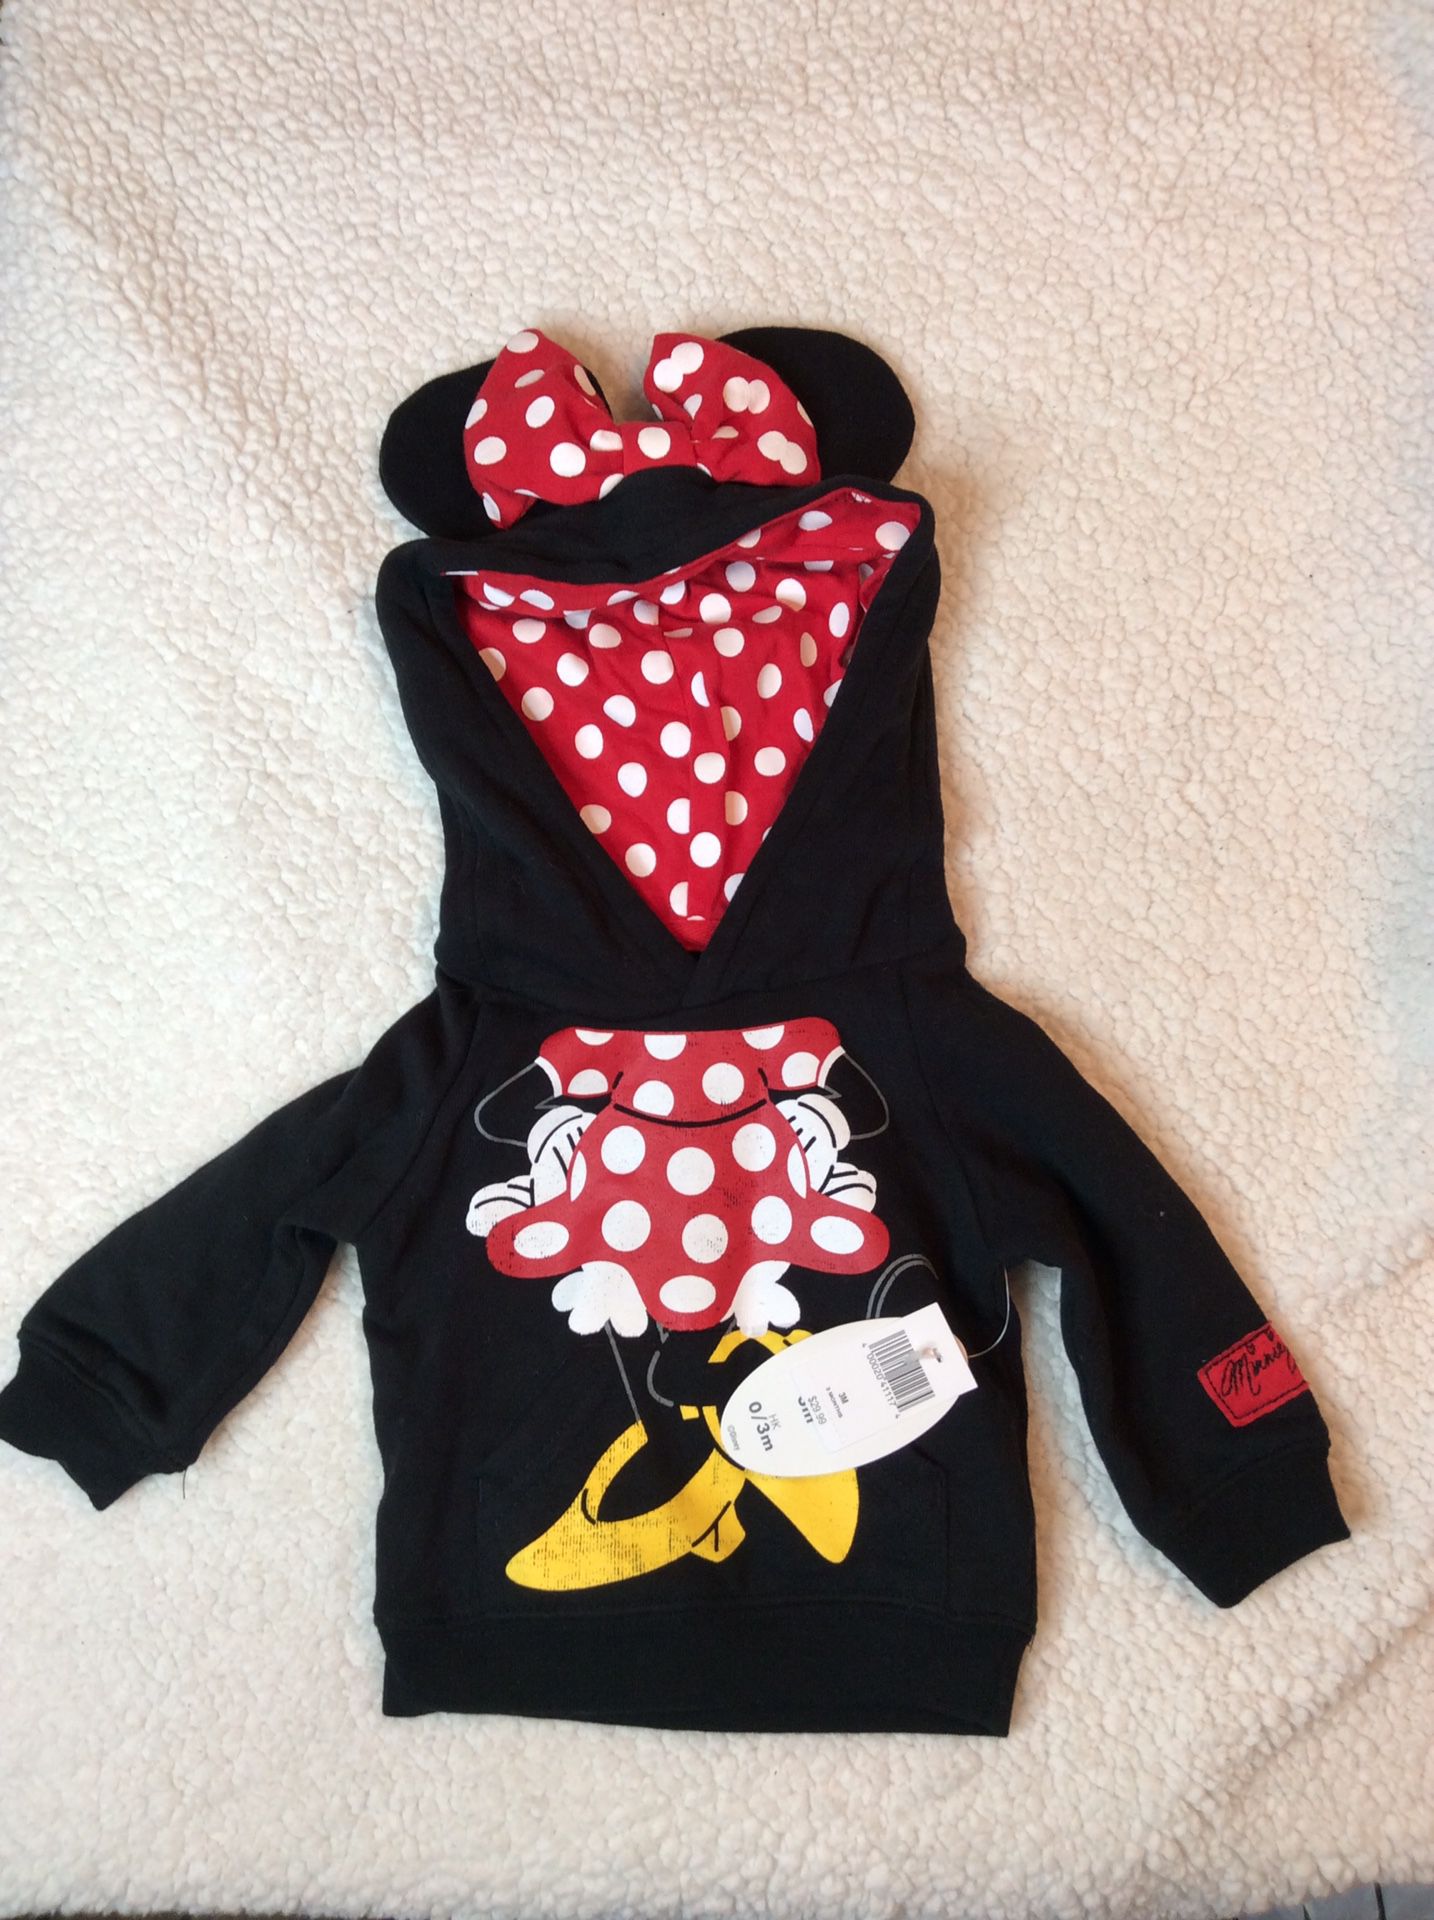 Disney Infant minnie mouse Ears hoodie sweater sz 0-3month Nwt